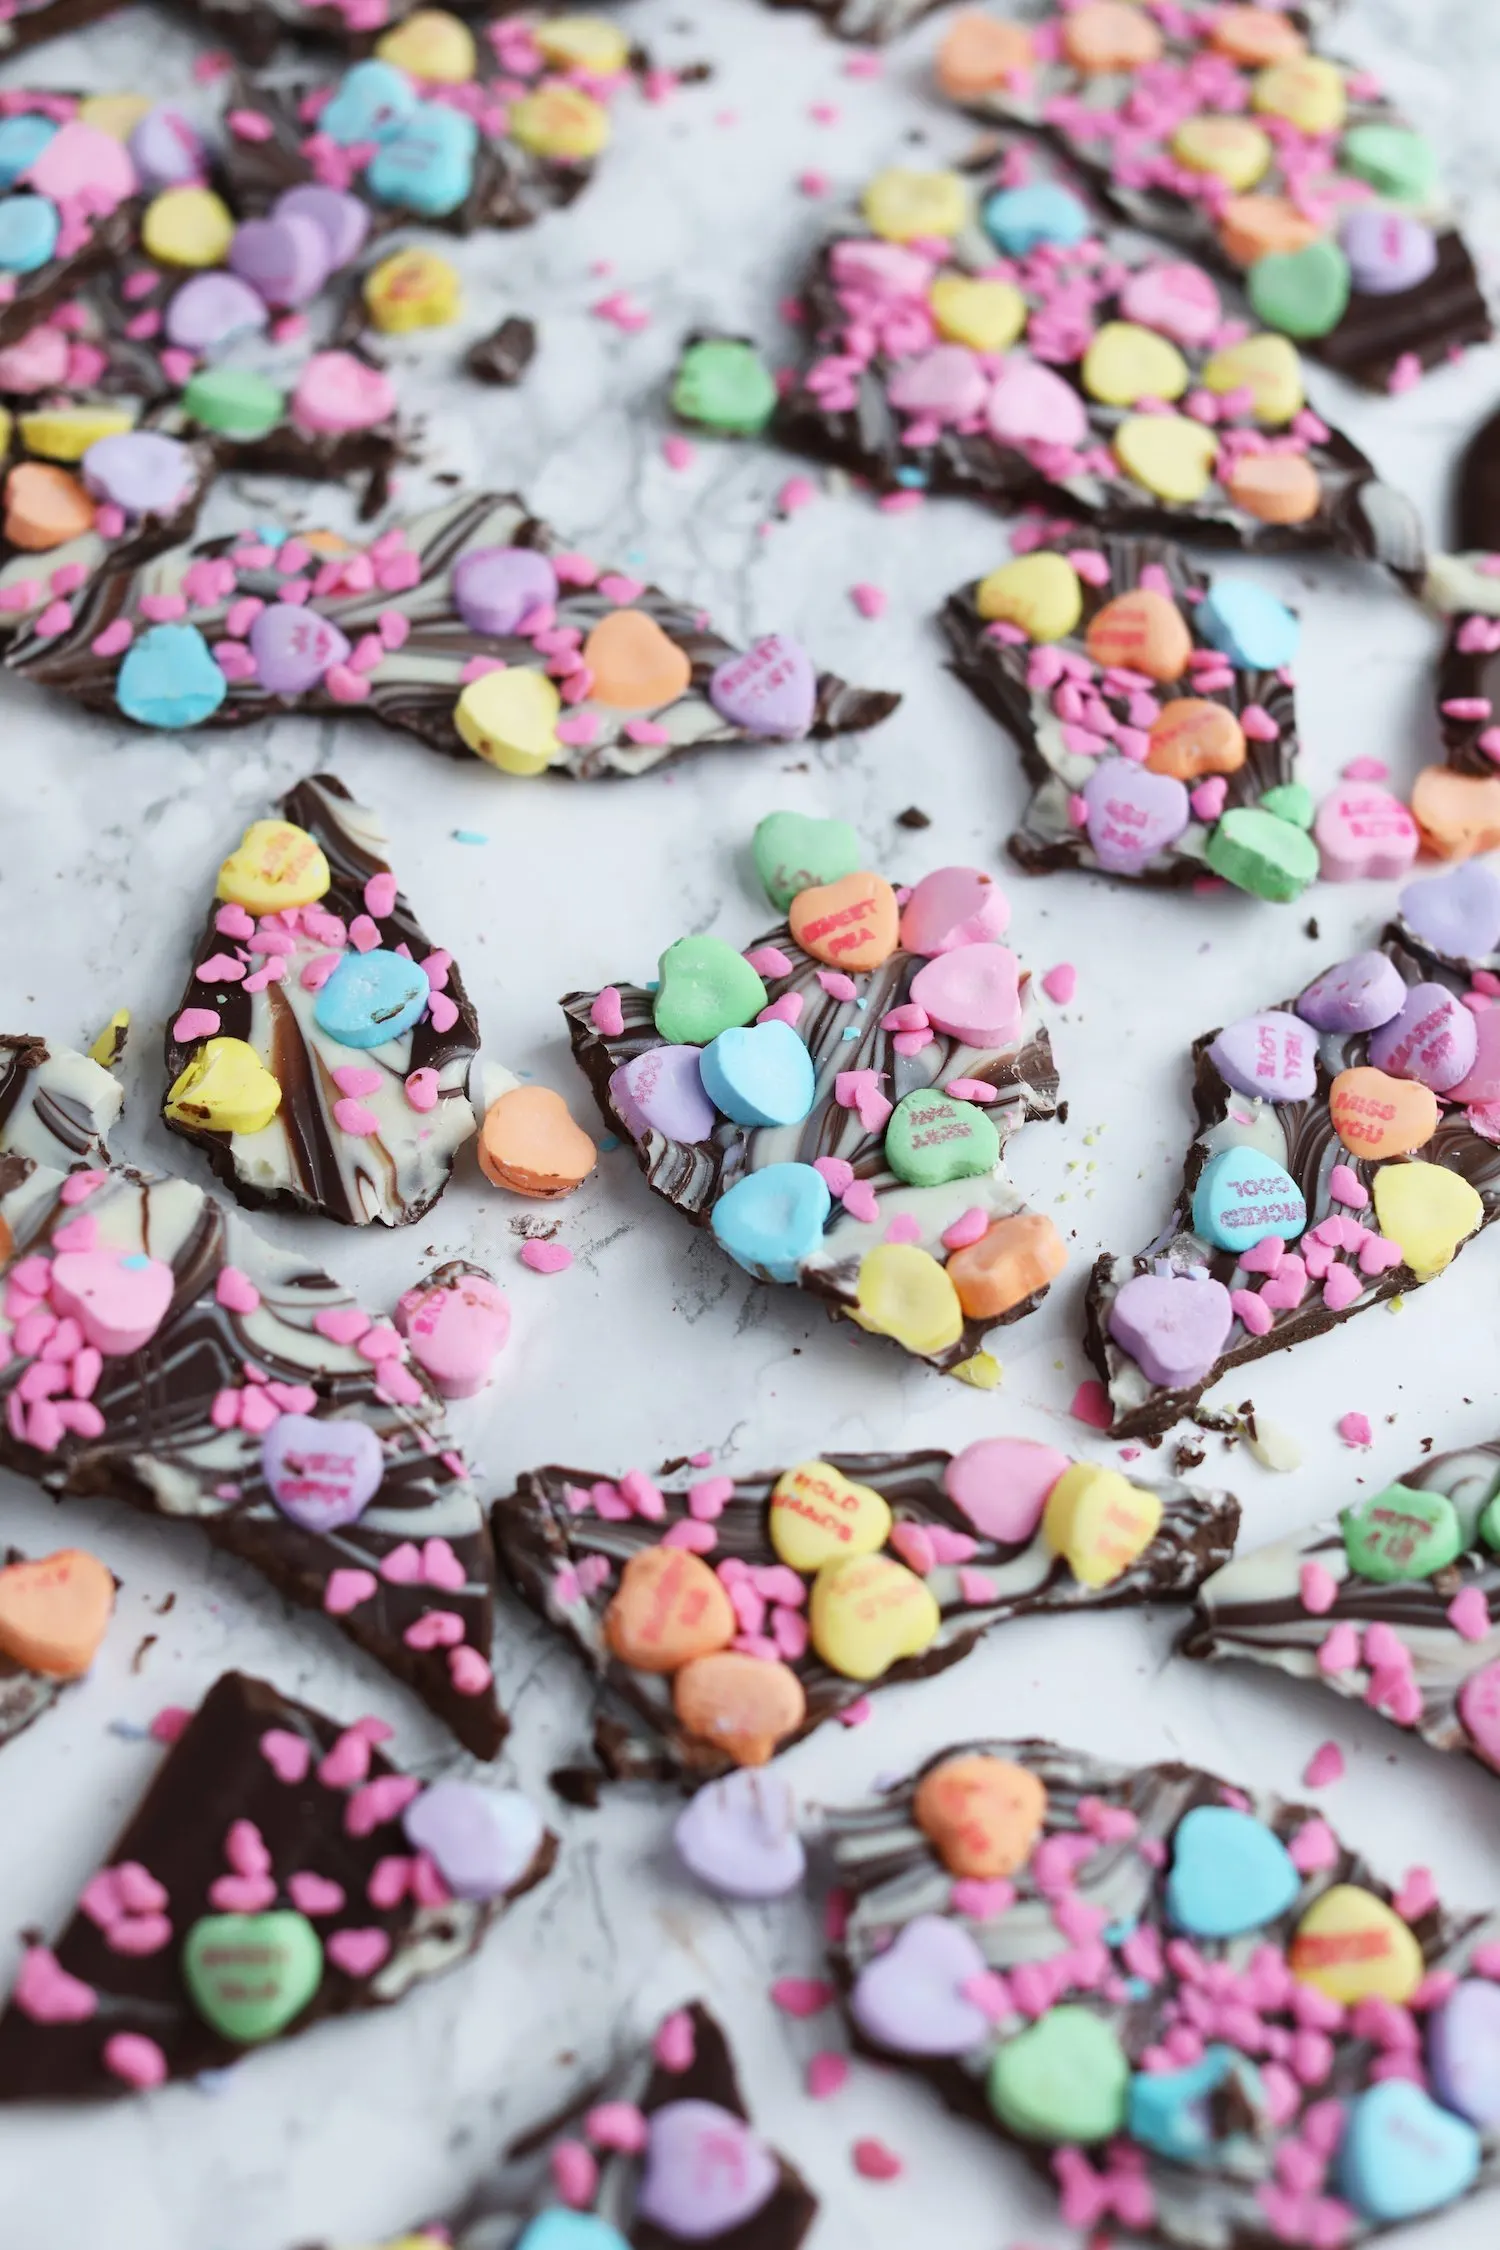 Easy Valentine's Day Gift Ideas | Valentine's Day Chocolate Bark Recipe from @cydconverse - Click through for loads of Valentine's Day DIY ideas, recipes and more!